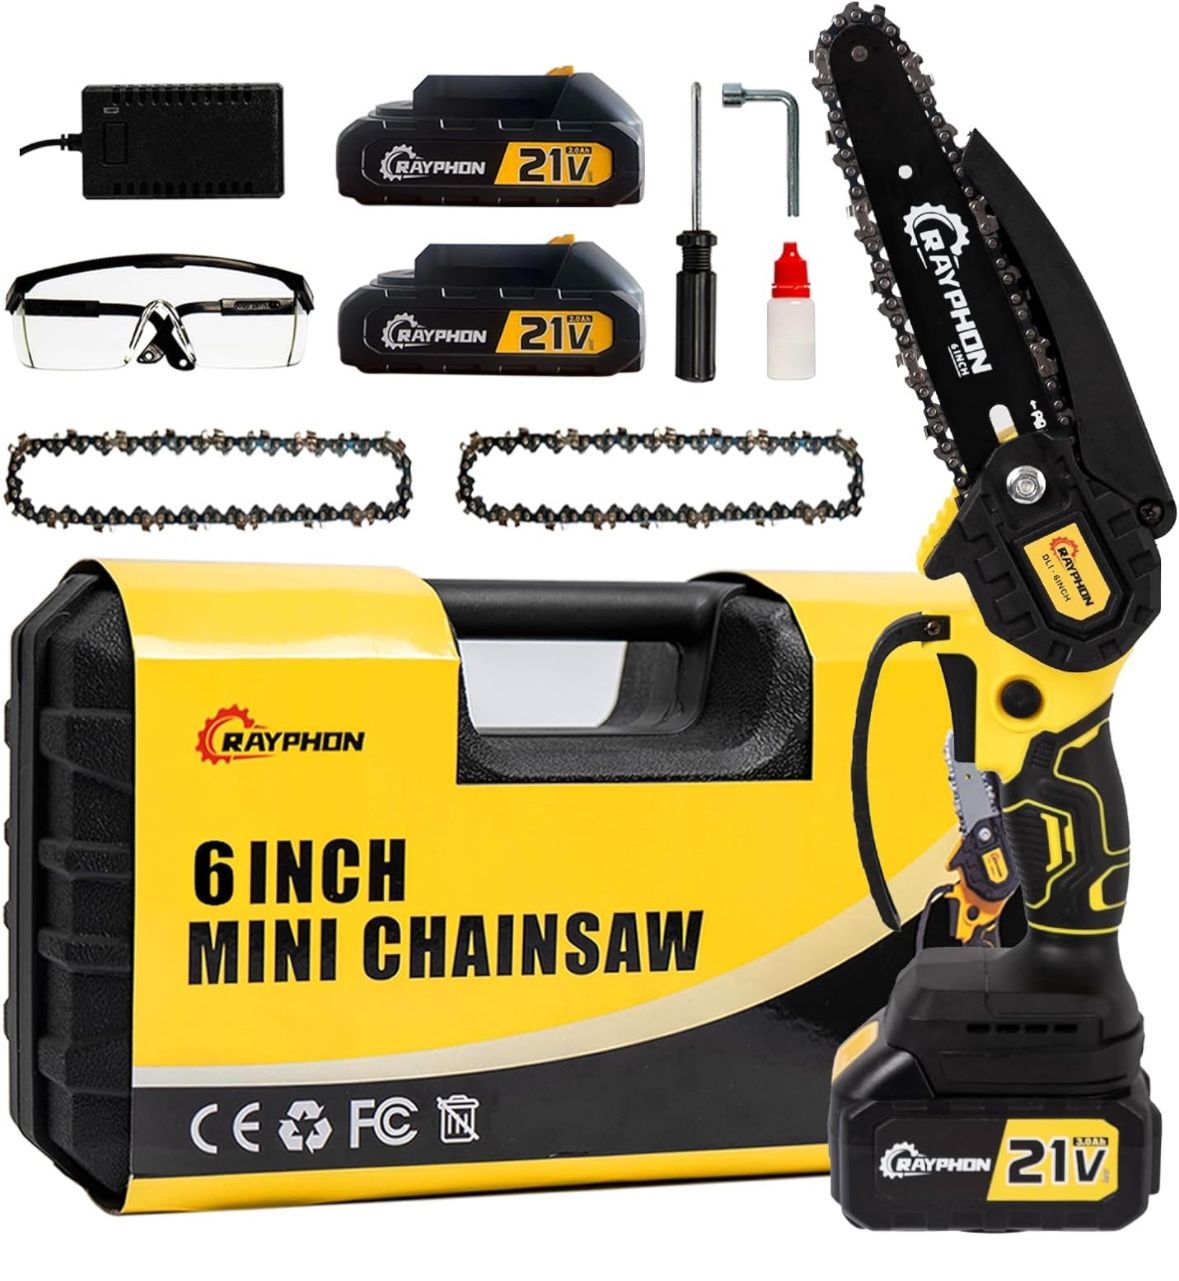 Mini Chainsaw 6-inch Cordless,Battey Powered Easy to Use Handheld Powerful Chainsaw with 2x21V 2.0Ah